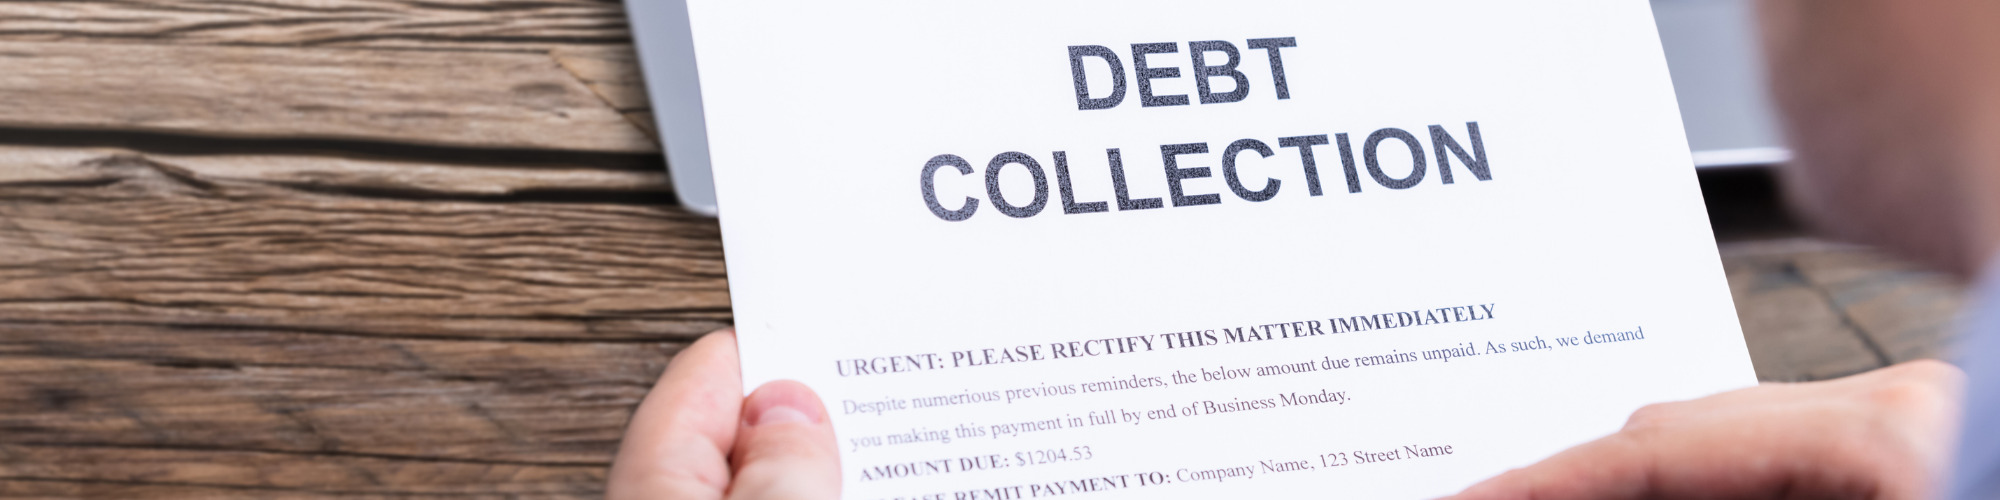 Debt Recovery in a Changing World - What’s New?